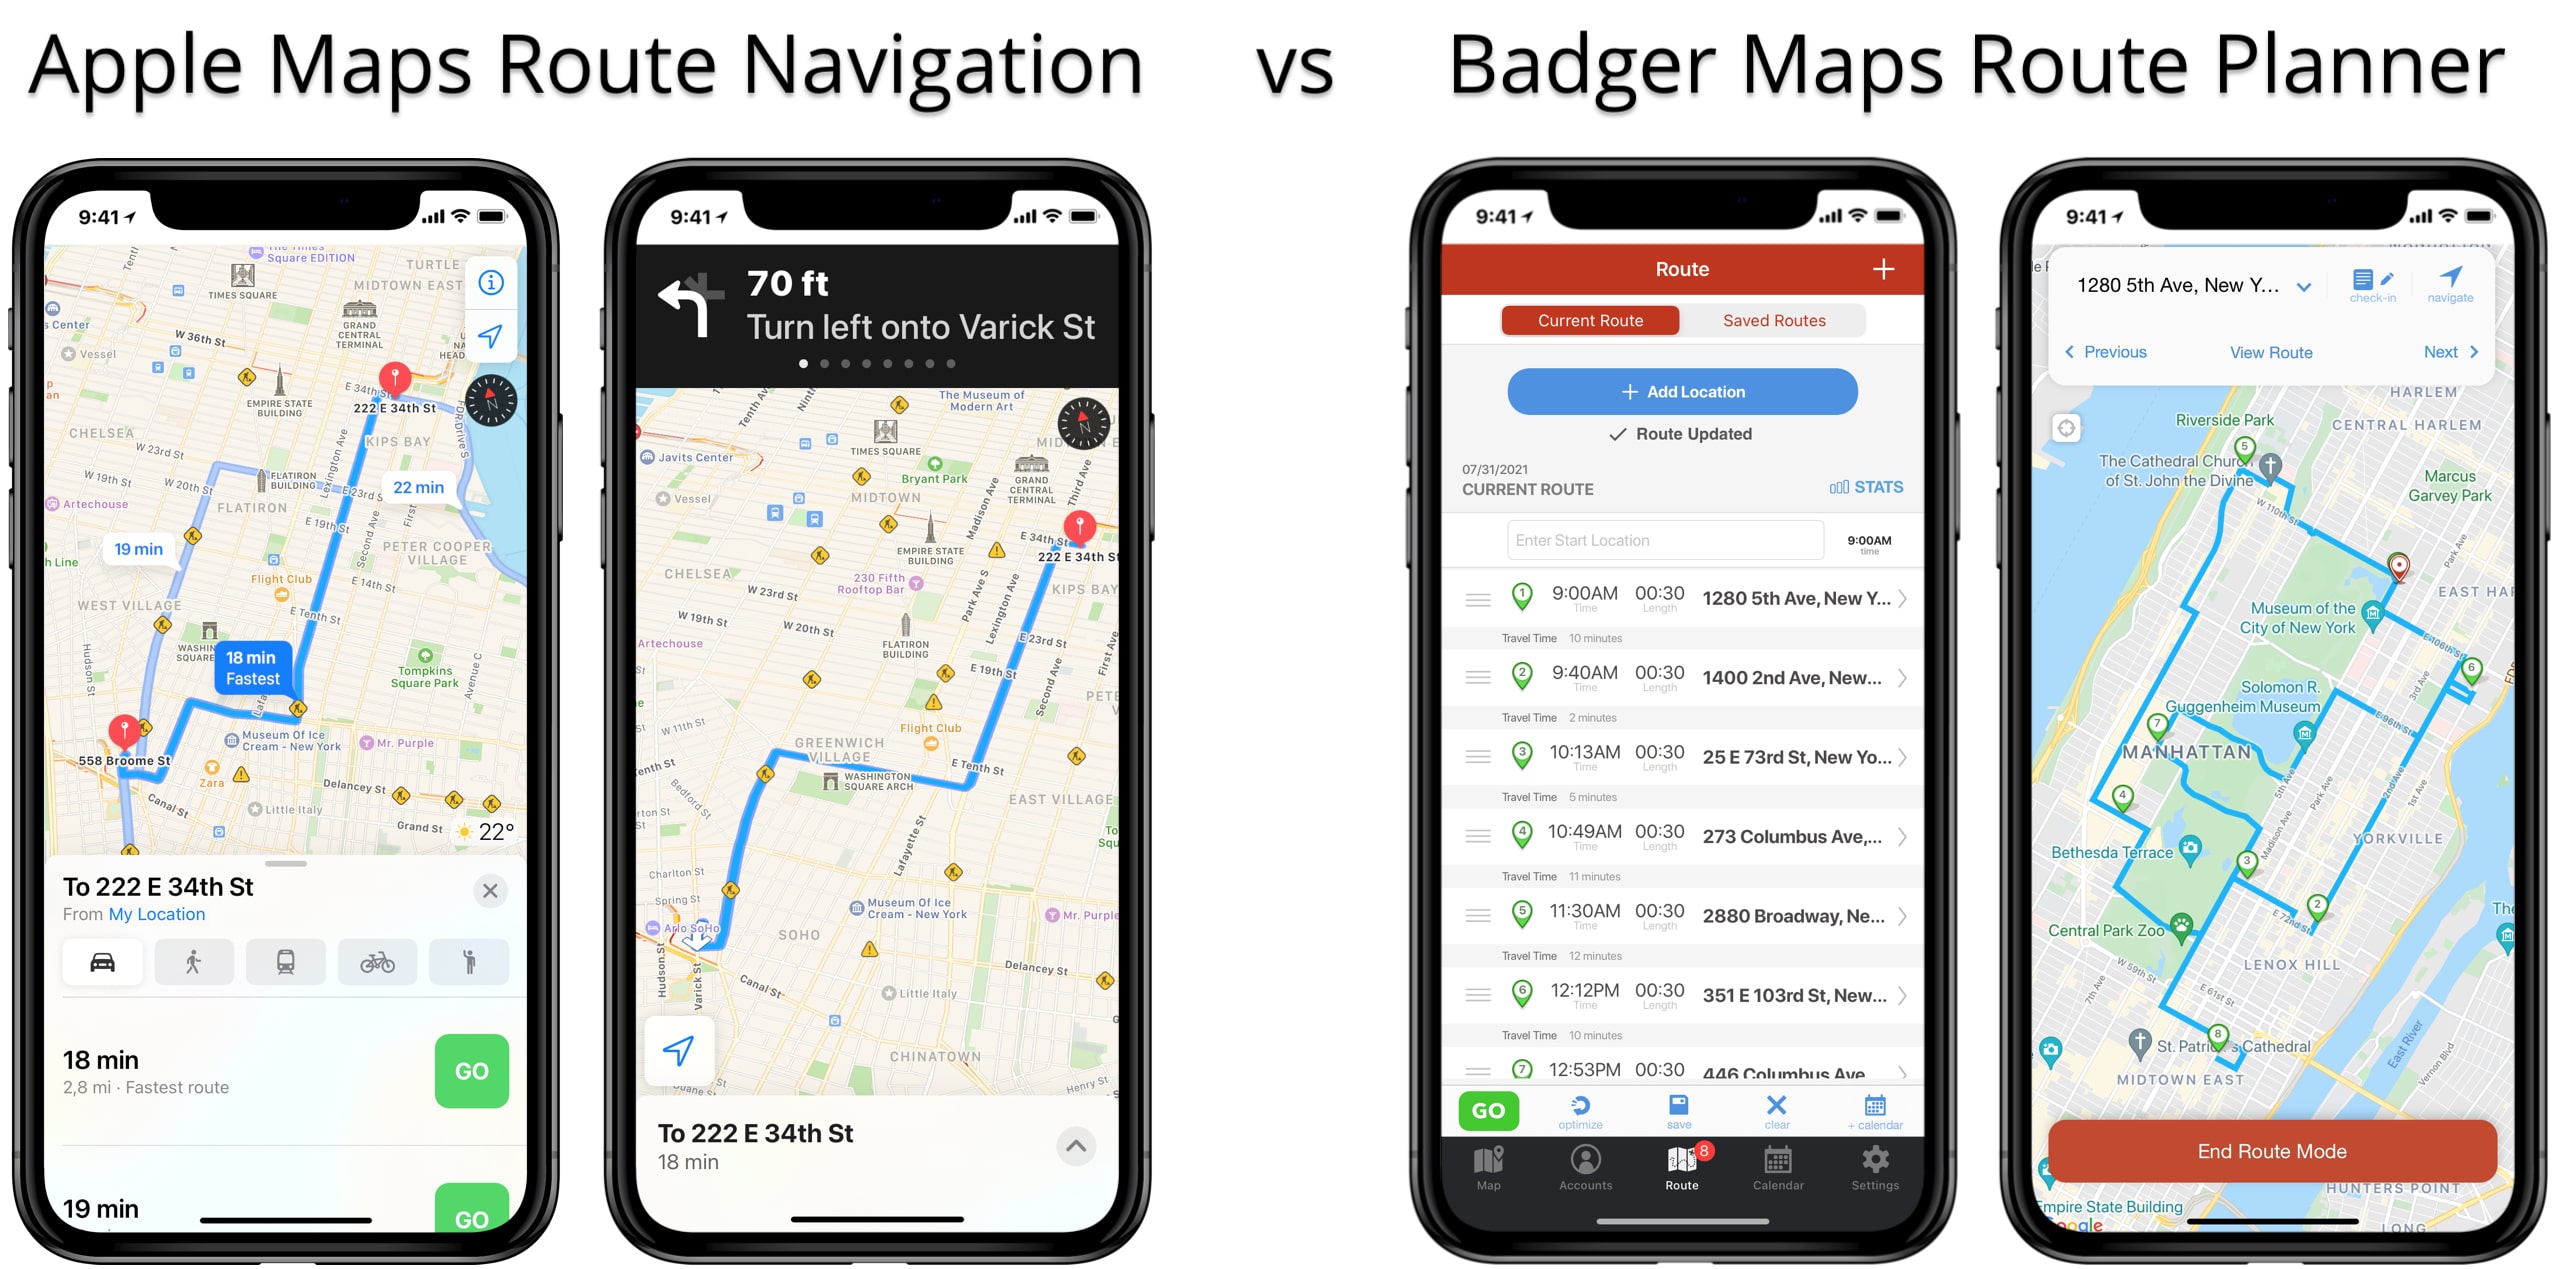 Apple Maps vs Badger Maps route planner for sales and last-mile route planning and optimization.